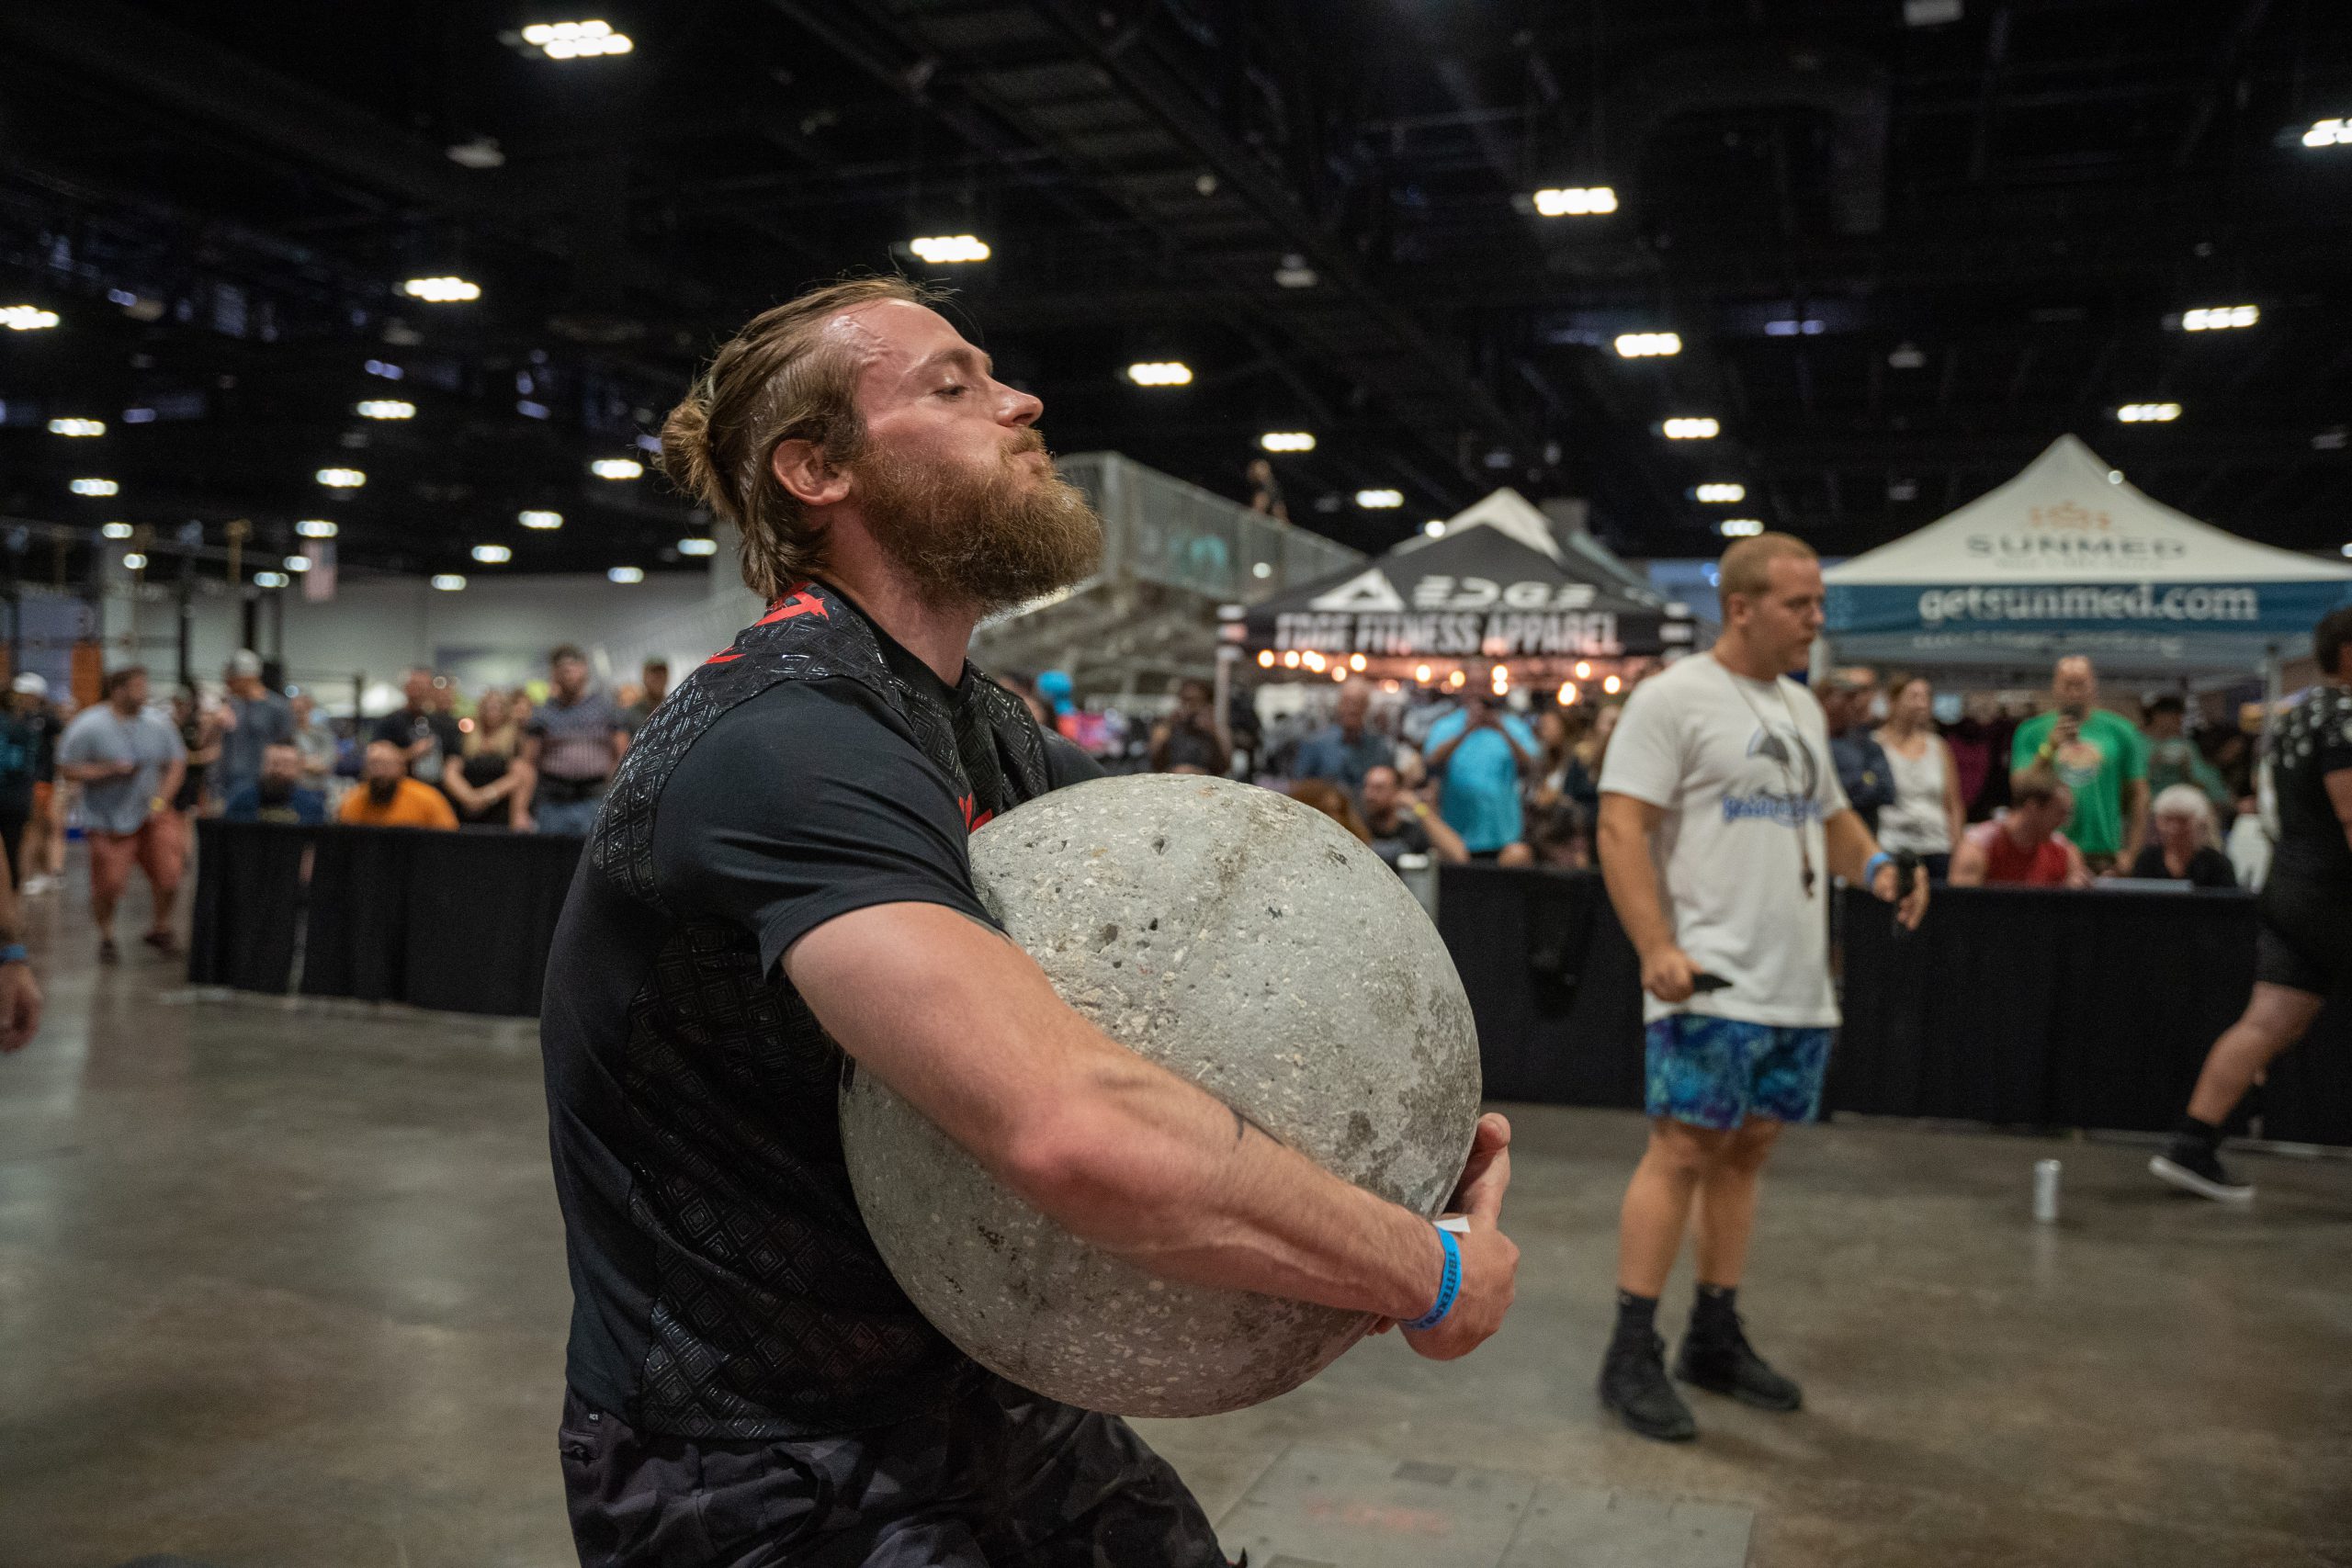 <img src="strongman_atlas_stone.jpg" alt="A strongman athlete lifting an atlas stone onto their shoulder repeatedly for reps. The athlete is shown with a wide stance, squatting down to grip the round stone placed on the ground. They are exerting great strength as they lift the stone off the ground and transition it to their shoulder in a controlled motion. The athlete's muscles are visibly engaged, showcasing their power and determination.">